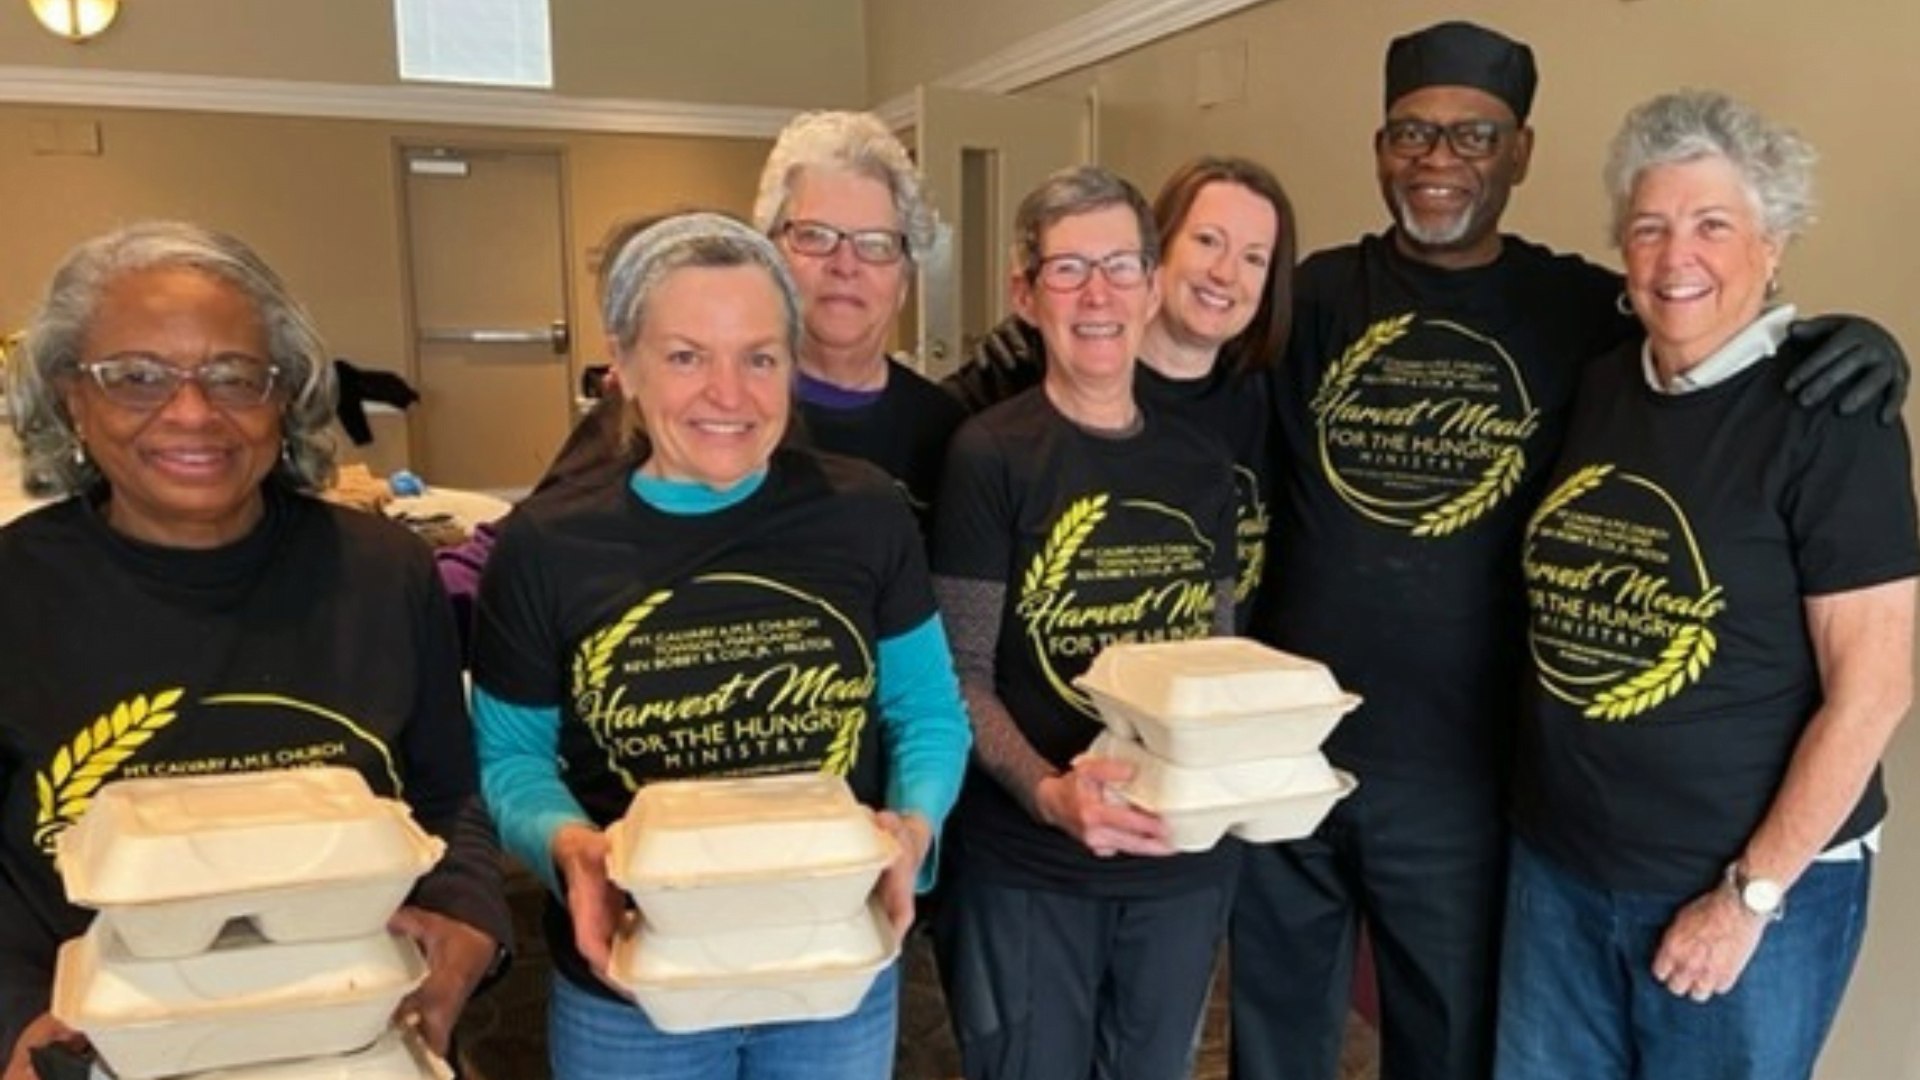 A group of individuals holding carry-out boxes for meals for the hungry